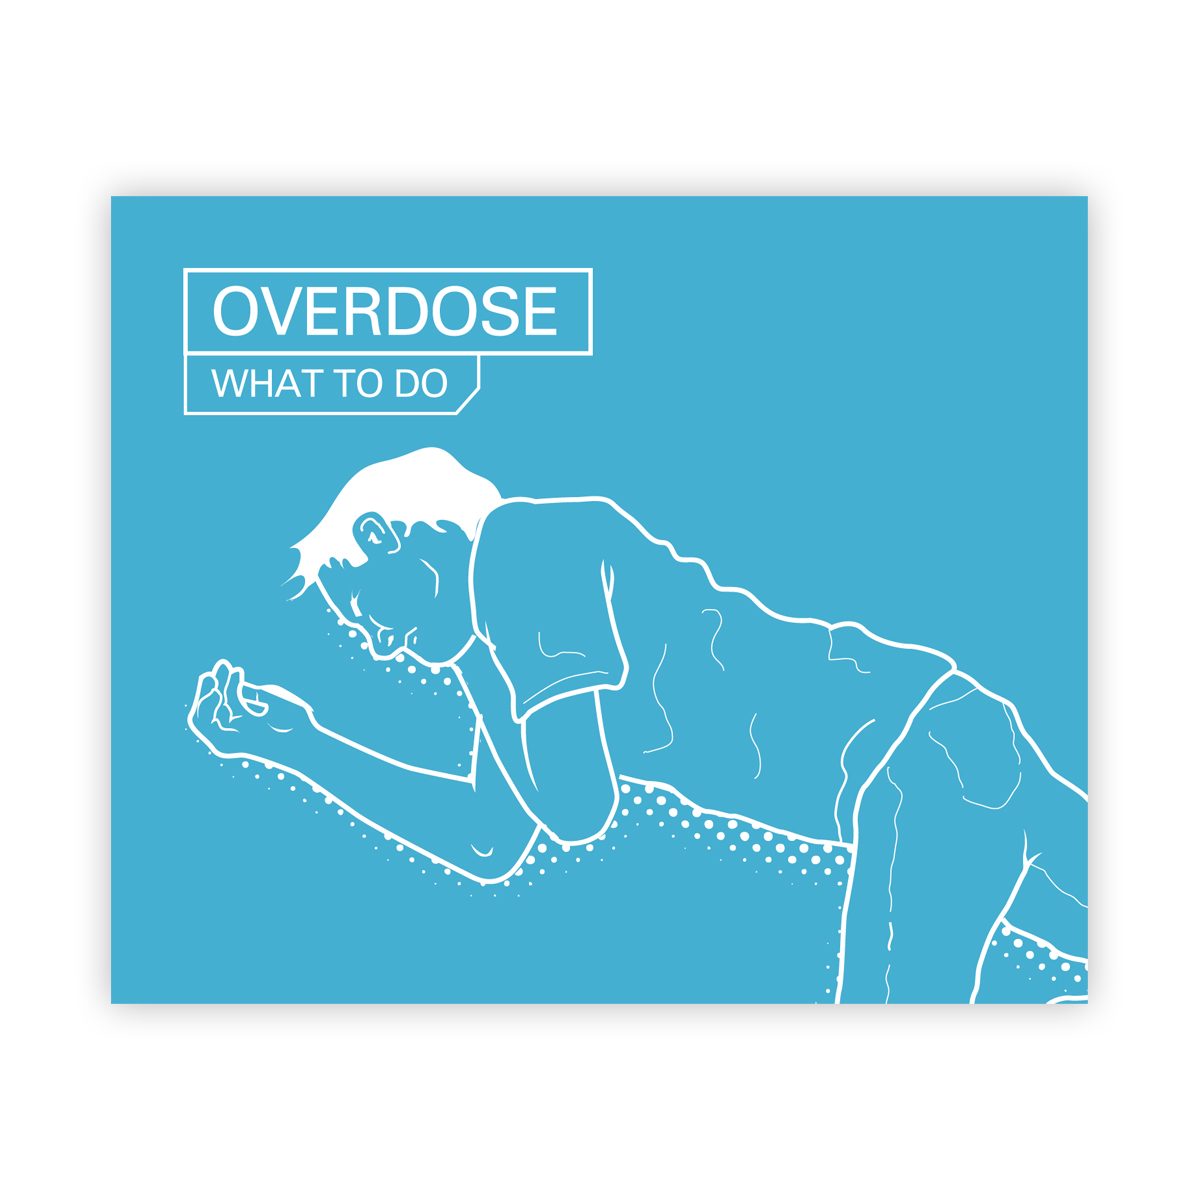 Overdose - what to do